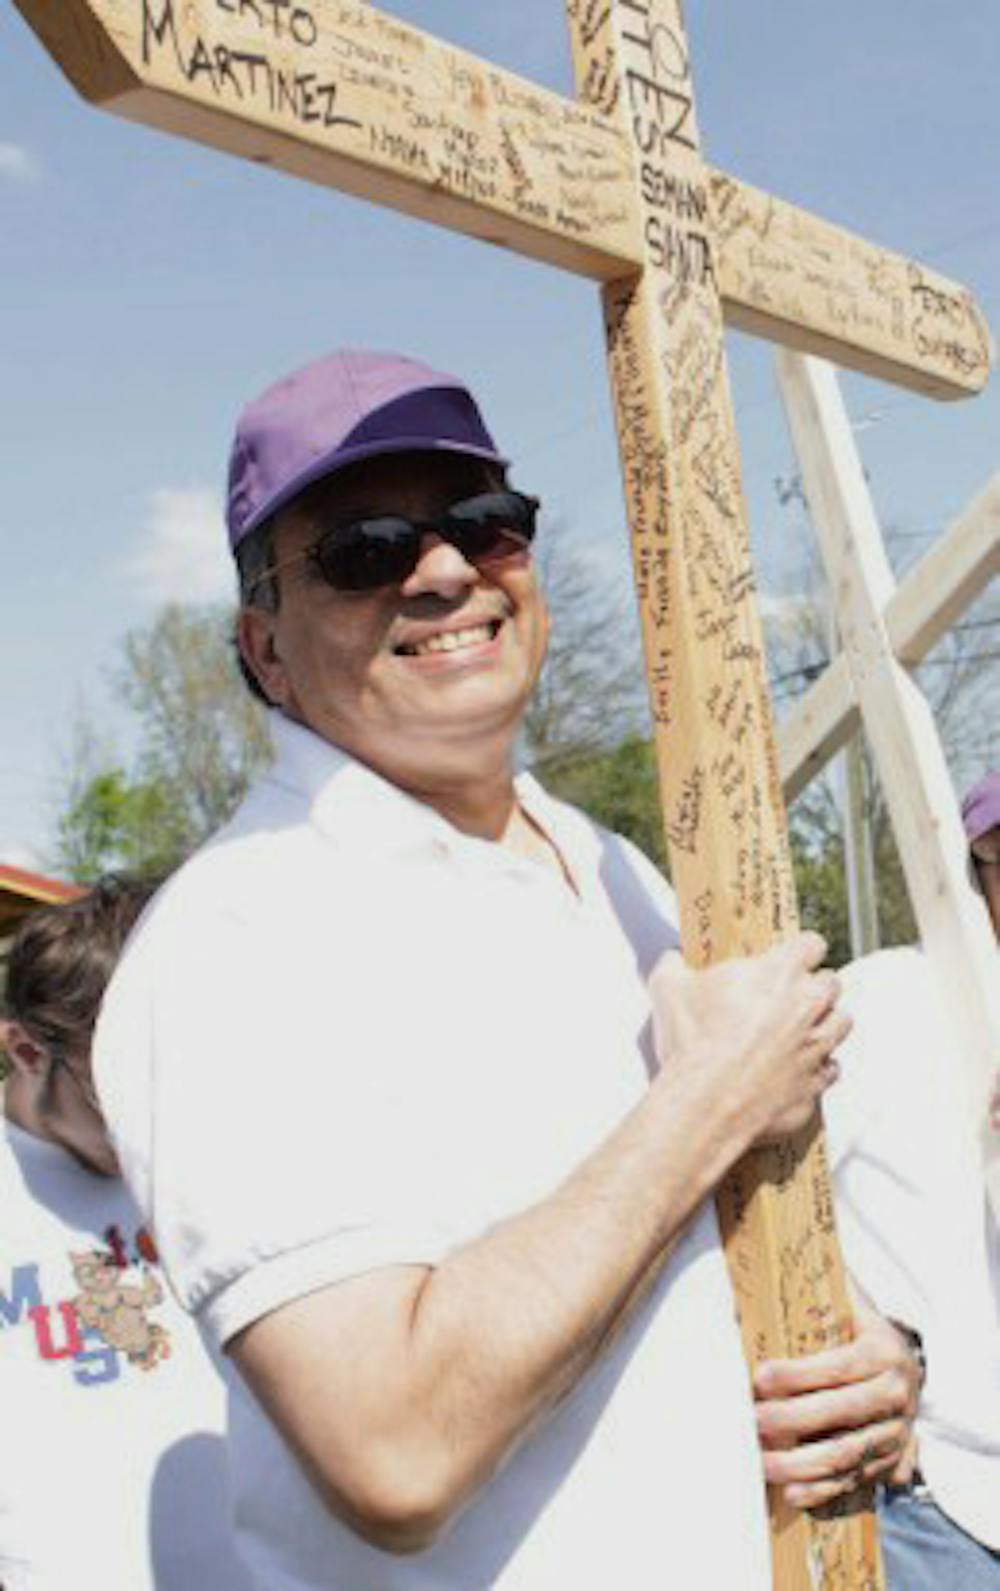 Mercer University School of Medicine Professor Dr. Richard Camino as he begins walk for Holy Week Pilgrimage for Immigrants at Centenary Methodist Church March 20.